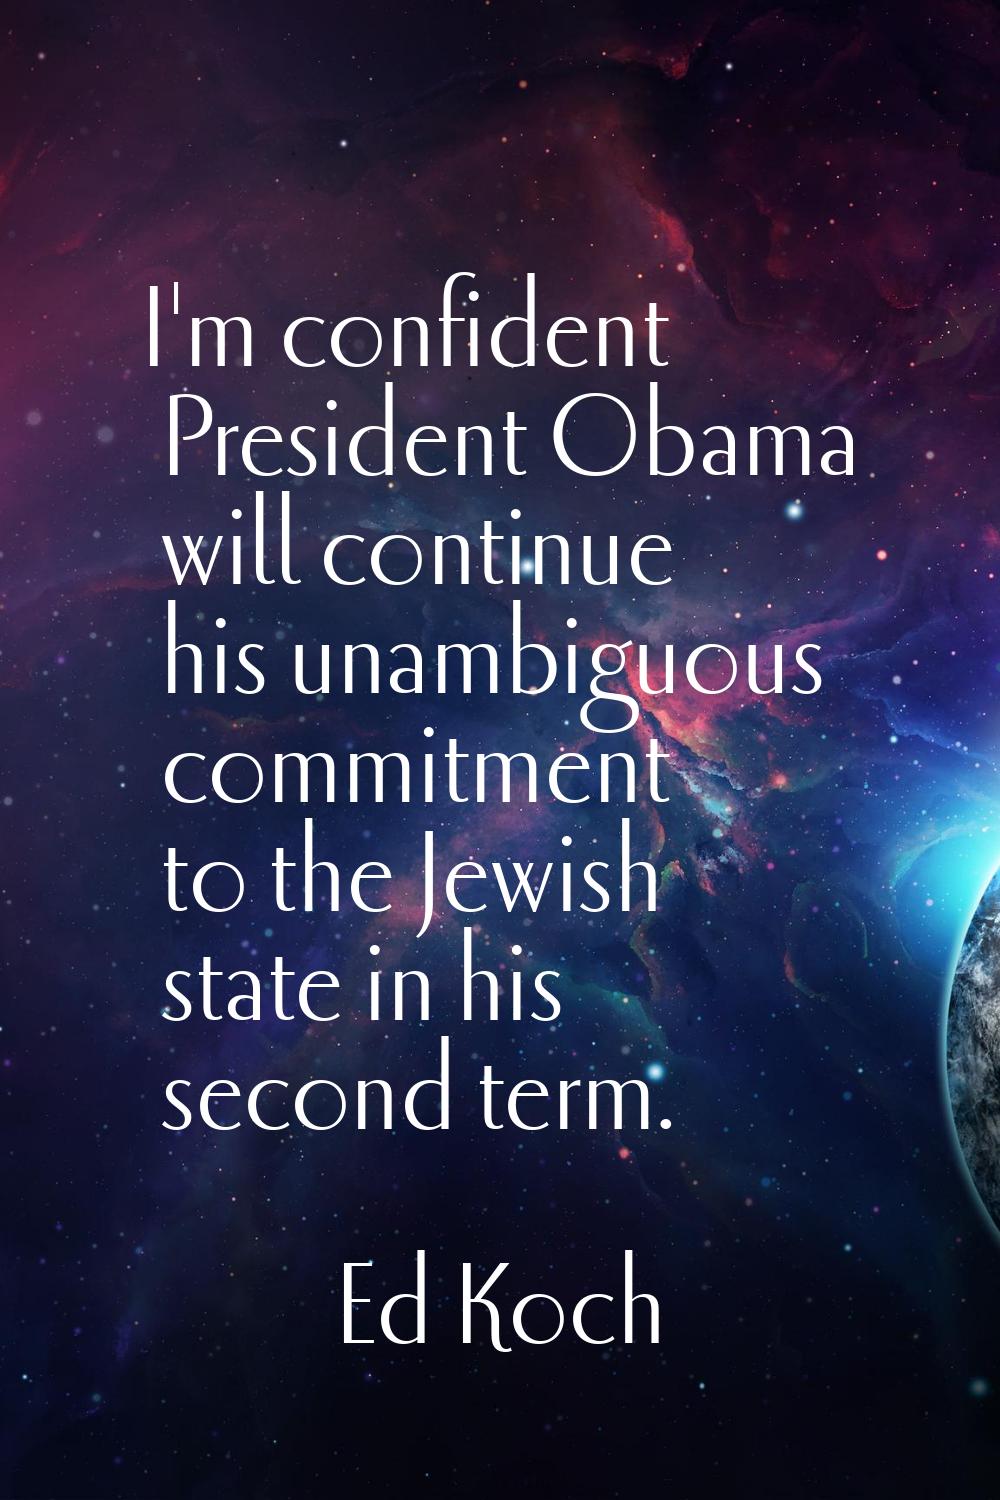 I'm confident President Obama will continue his unambiguous commitment to the Jewish state in his s